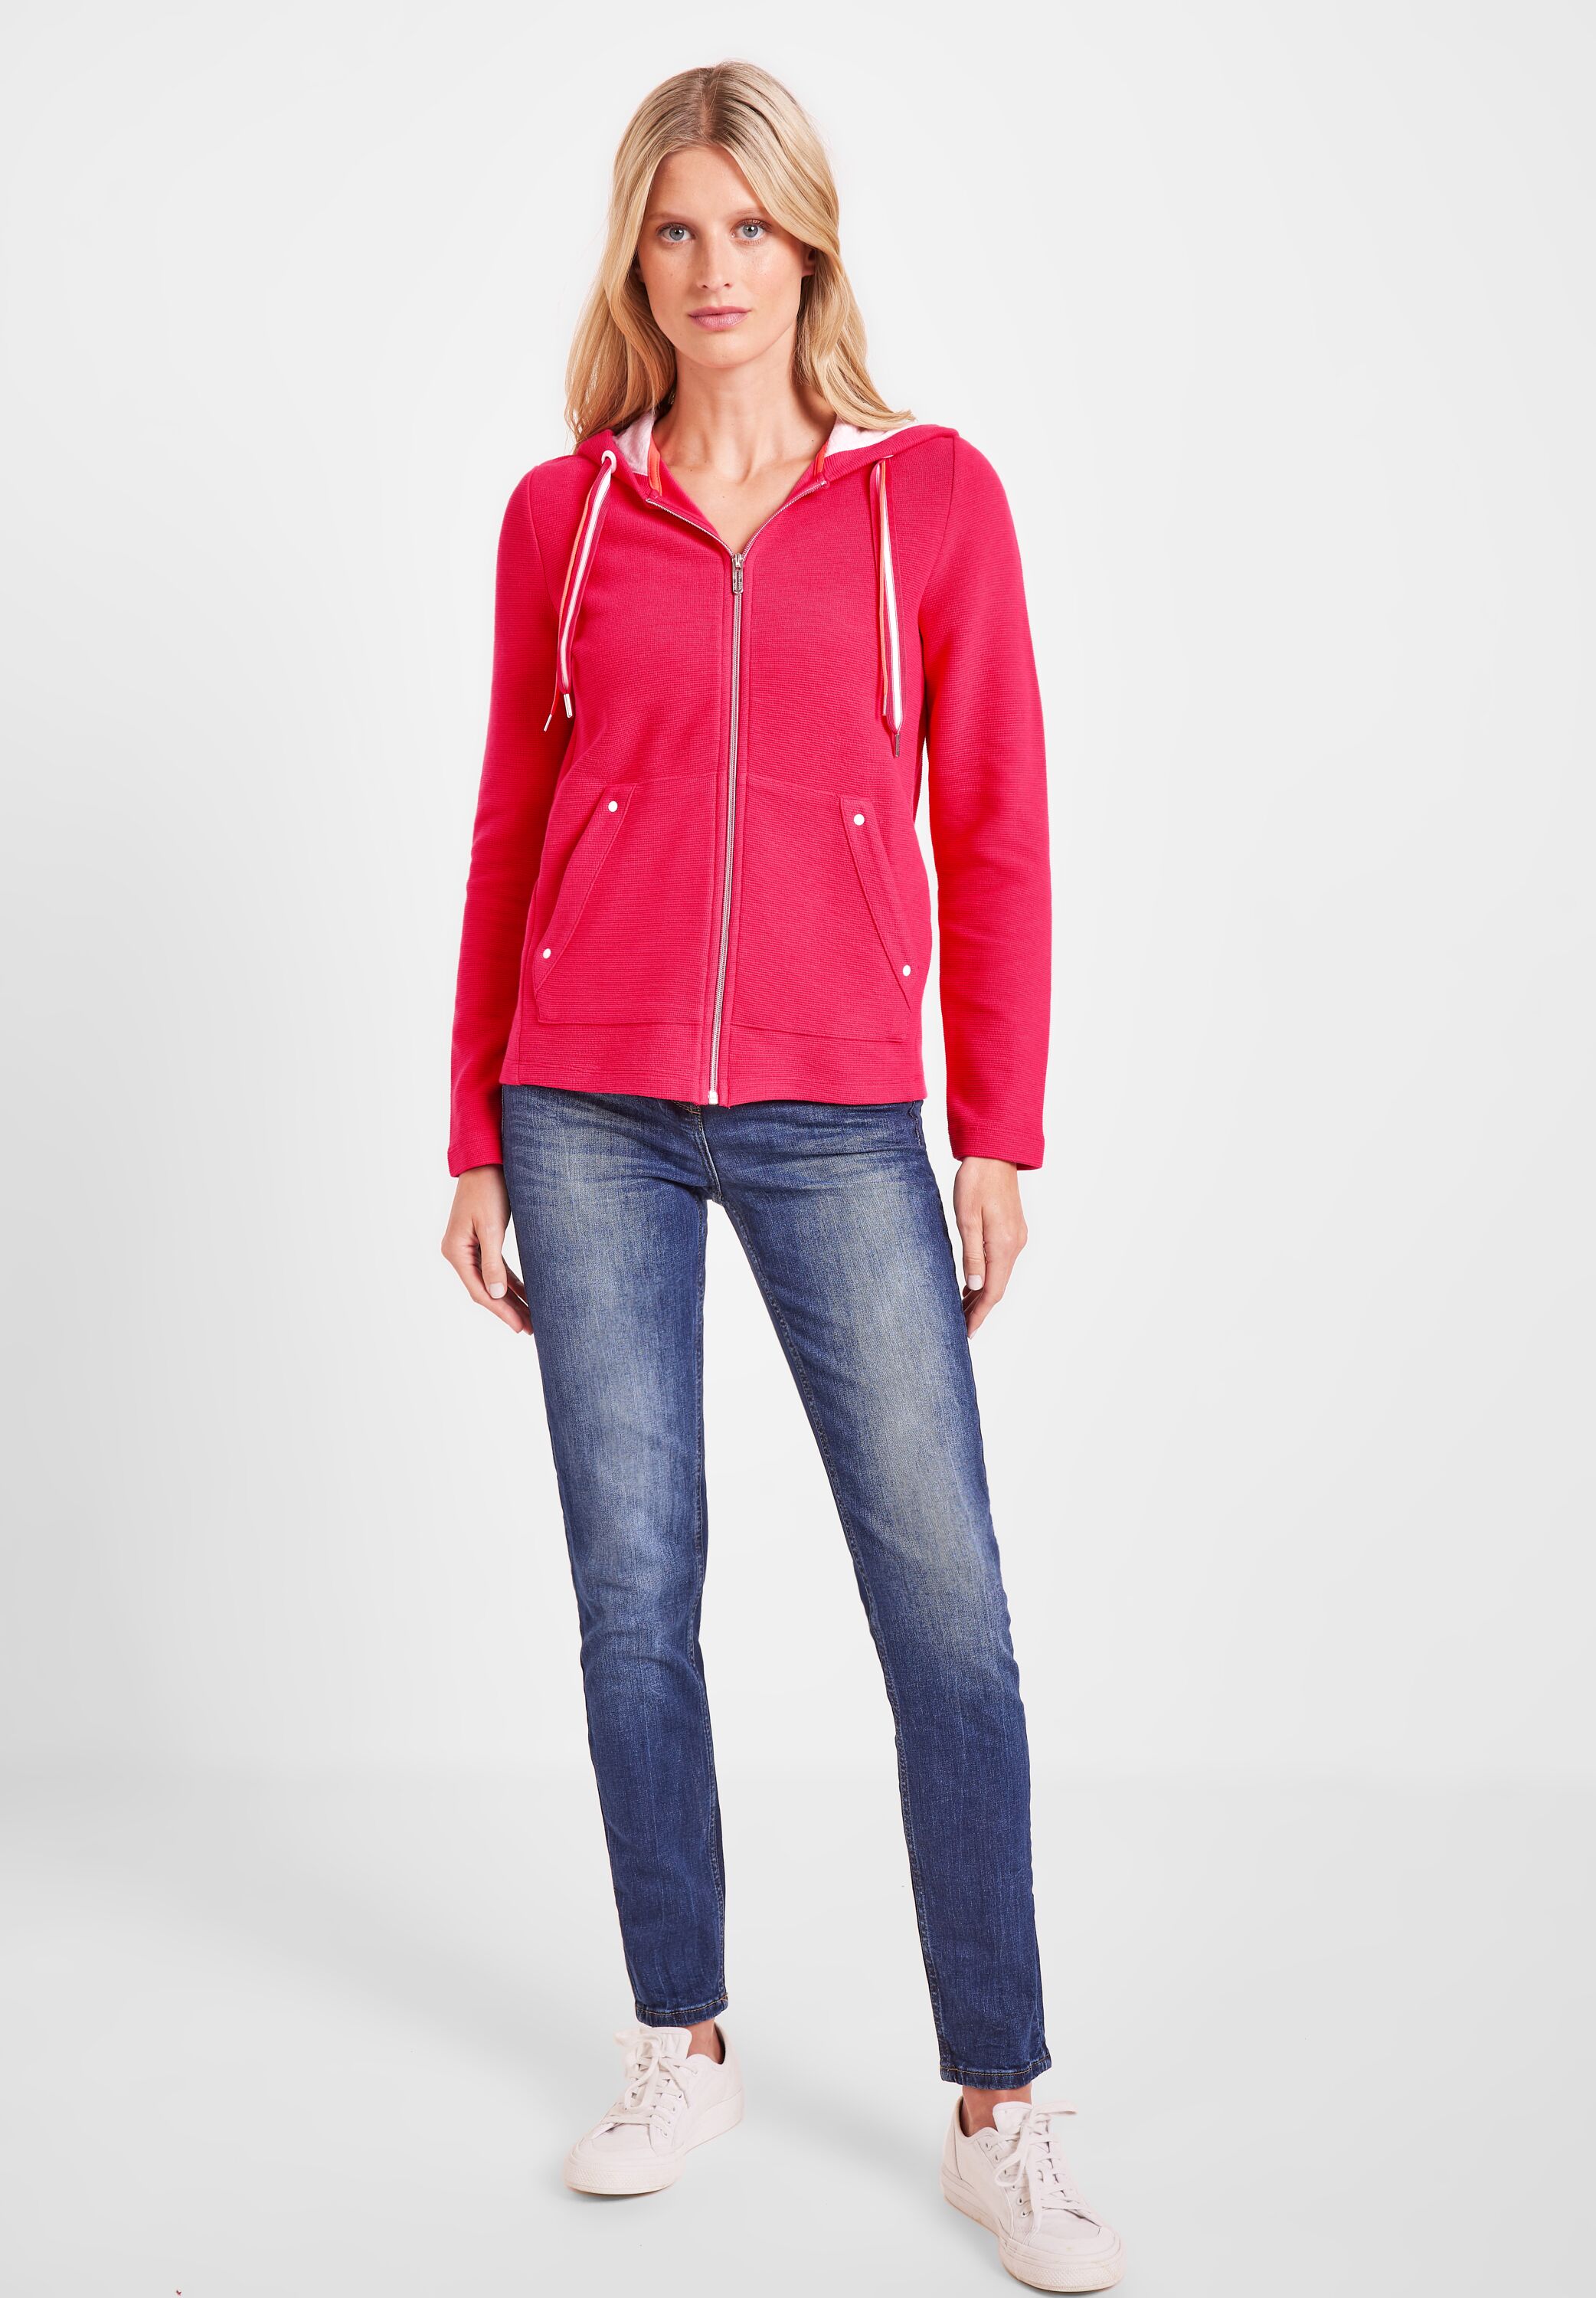 SALE reduziert CONCEPT Red B319398-14472 in im Strawberry - Shirtjacke CECIL Mode